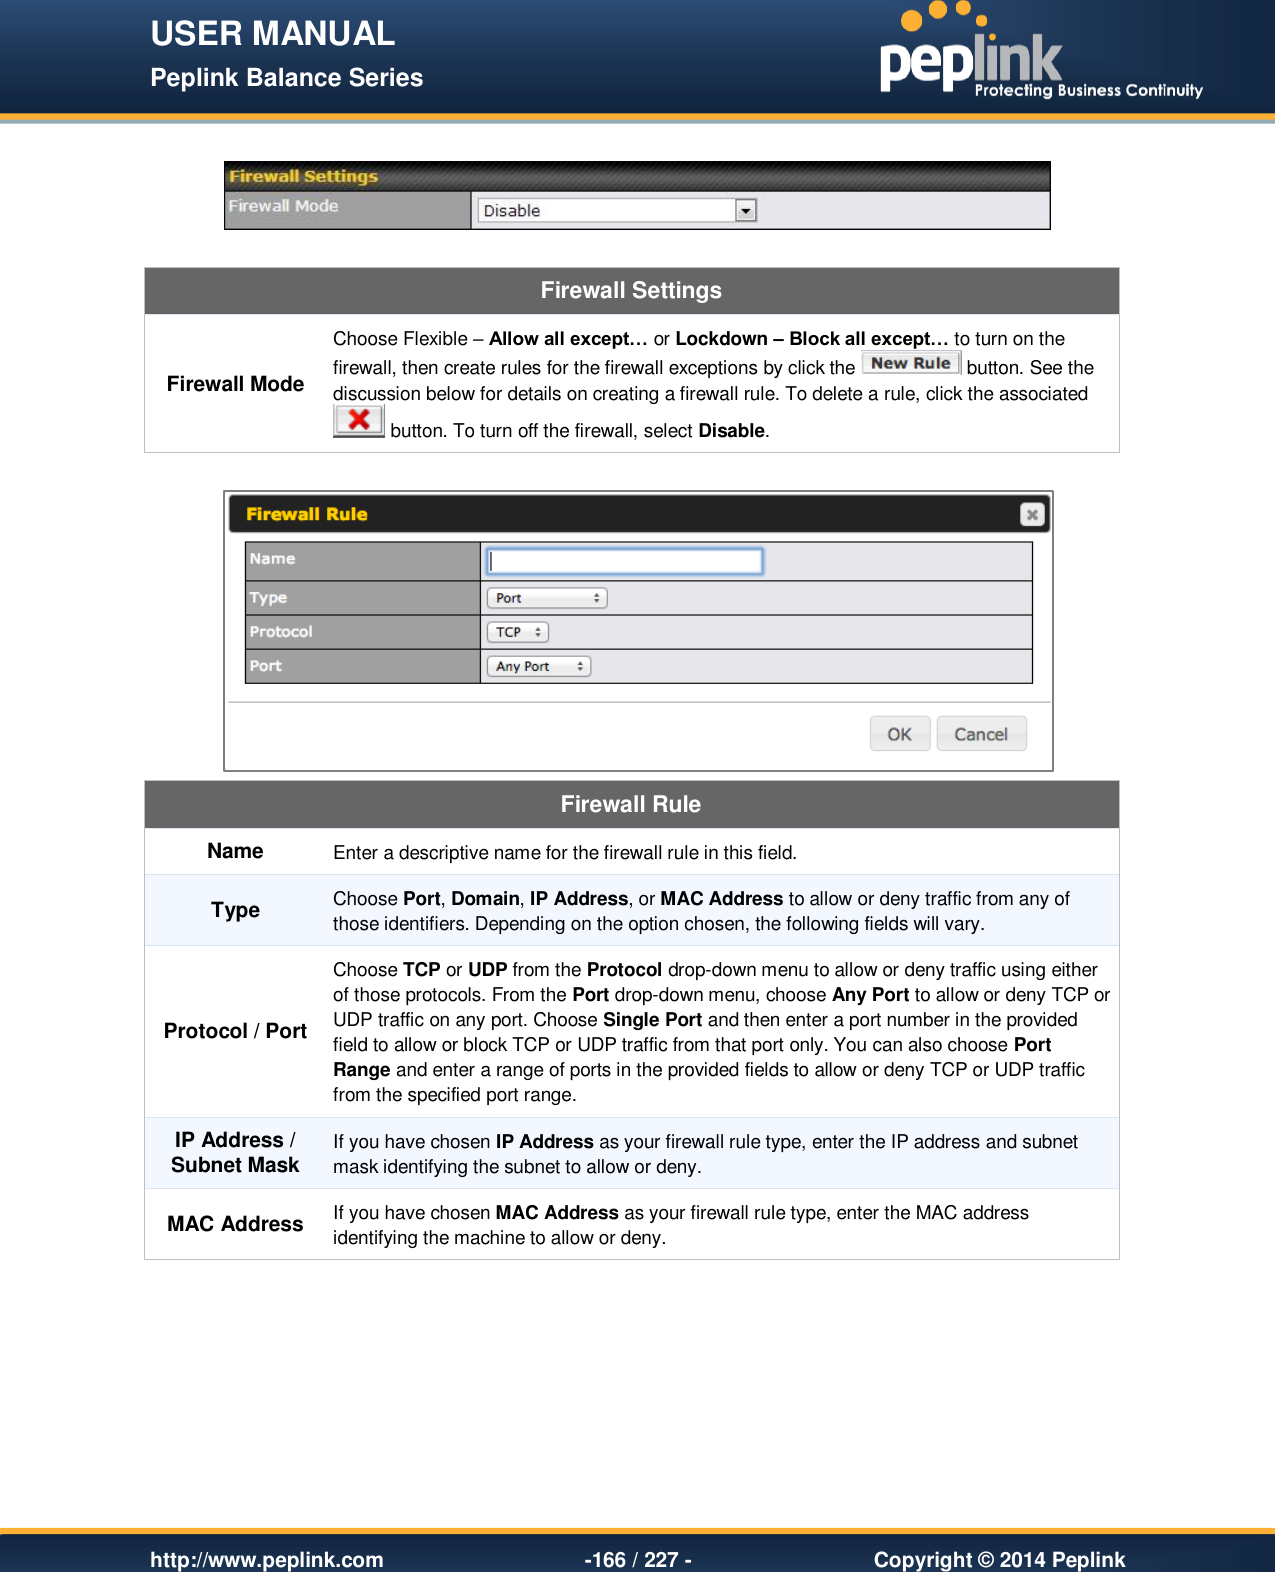 USER MANUAL Peplink Balance Series   http://www.peplink.com -166 / 227 -  Copyright © 2014 Peplink    Firewall Settings Firewall Mode Choose Flexible – Allow all except… or Lockdown – Block all except… to turn on the firewall, then create rules for the firewall exceptions by click the   button. See the discussion below for details on creating a firewall rule. To delete a rule, click the associated   button. To turn off the firewall, select Disable.   Firewall Rule Name Enter a descriptive name for the firewall rule in this field. Type Choose Port, Domain, IP Address, or MAC Address to allow or deny traffic from any of those identifiers. Depending on the option chosen, the following fields will vary. Protocol / Port Choose TCP or UDP from the Protocol drop-down menu to allow or deny traffic using either of those protocols. From the Port drop-down menu, choose Any Port to allow or deny TCP or UDP traffic on any port. Choose Single Port and then enter a port number in the provided field to allow or block TCP or UDP traffic from that port only. You can also choose Port Range and enter a range of ports in the provided fields to allow or deny TCP or UDP traffic from the specified port range. IP Address / Subnet Mask If you have chosen IP Address as your firewall rule type, enter the IP address and subnet mask identifying the subnet to allow or deny. MAC Address If you have chosen MAC Address as your firewall rule type, enter the MAC address identifying the machine to allow or deny.     